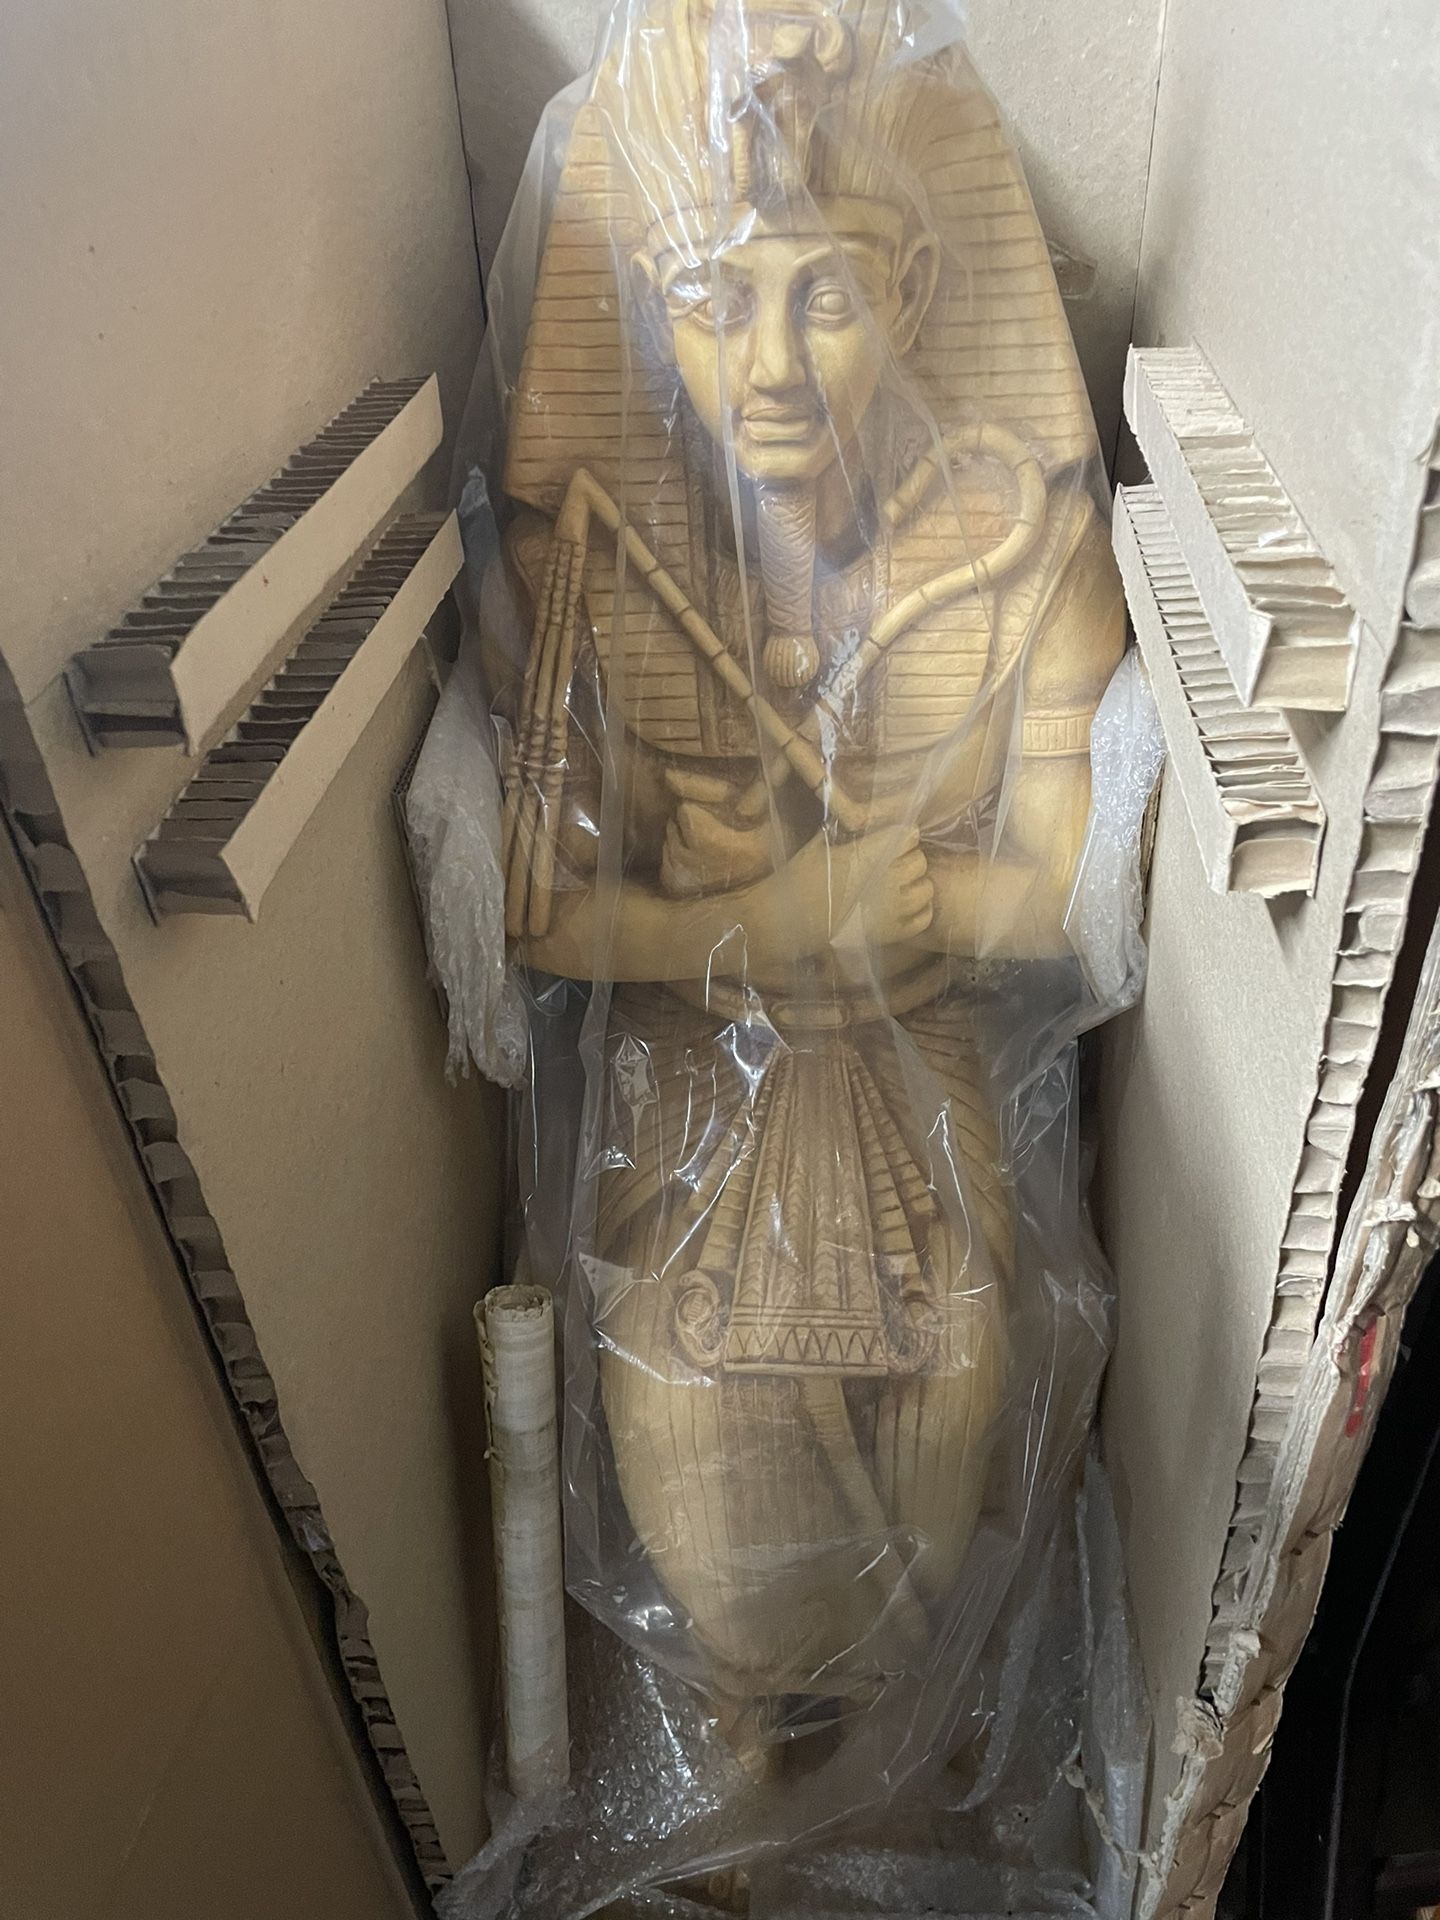 Very Unique  3’ Egyptian Pharoah Wooden Statue